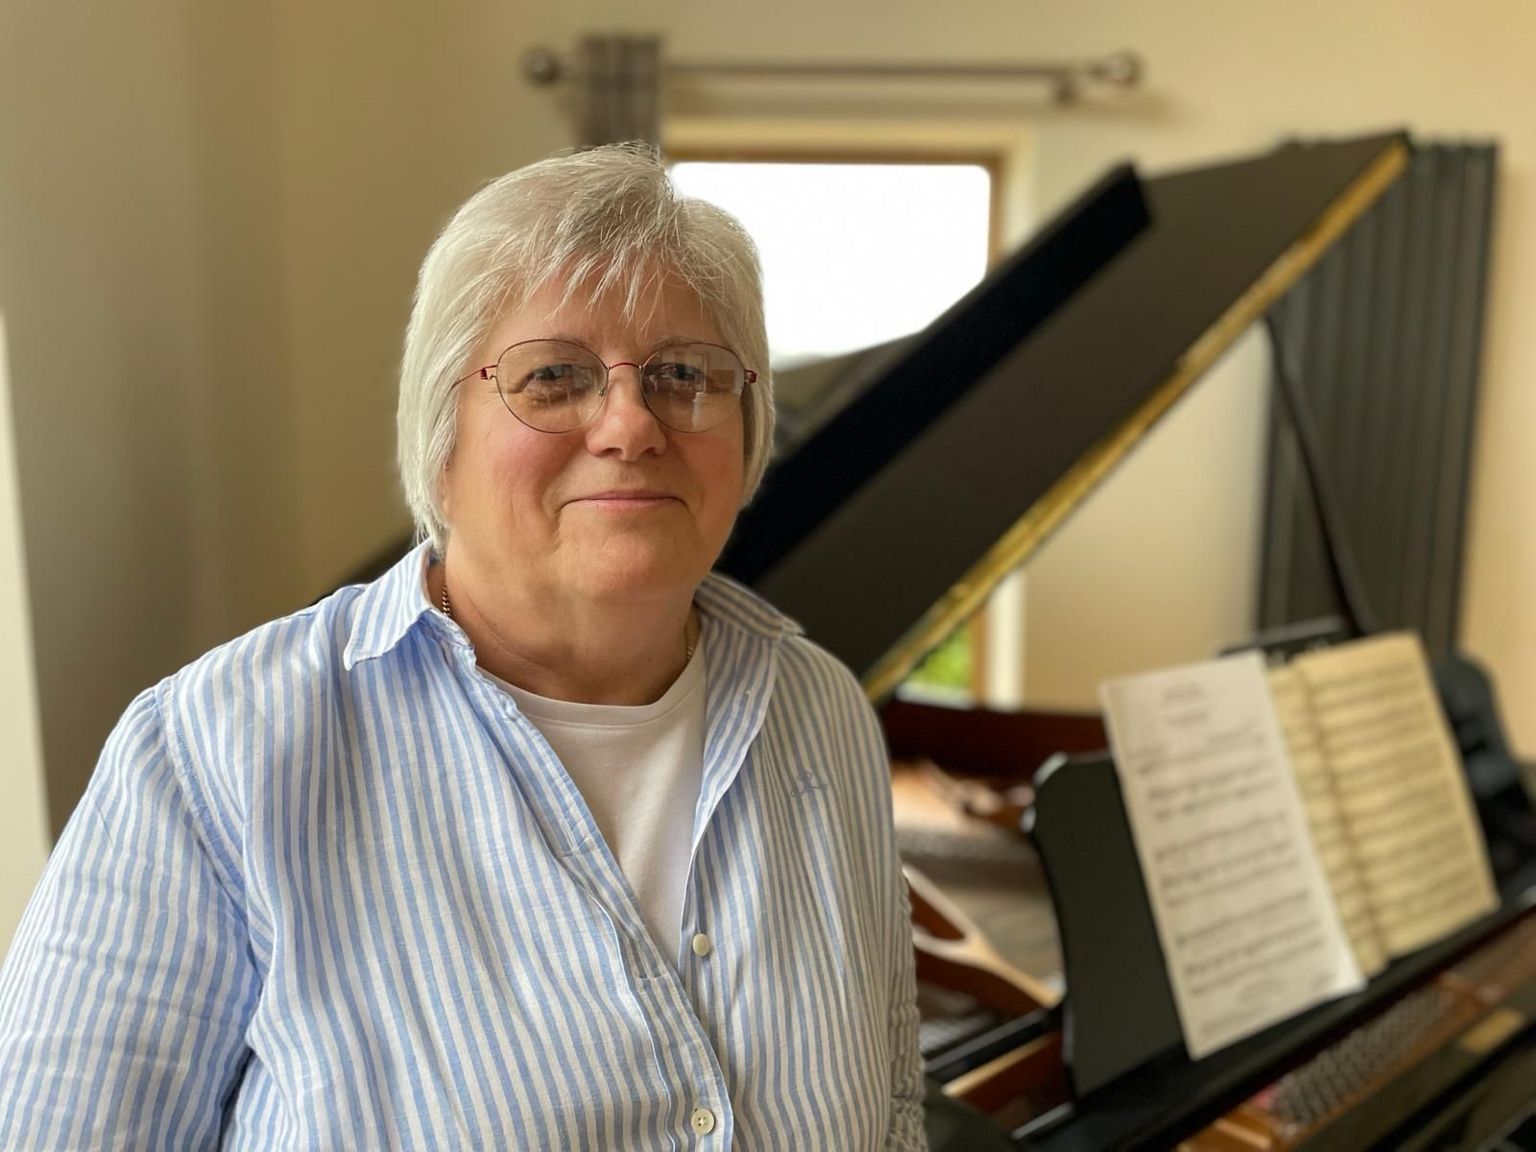 Ann is a white woman with short, grey hair and she is wearing glasses. She is stood next to her late husband's grand piano.